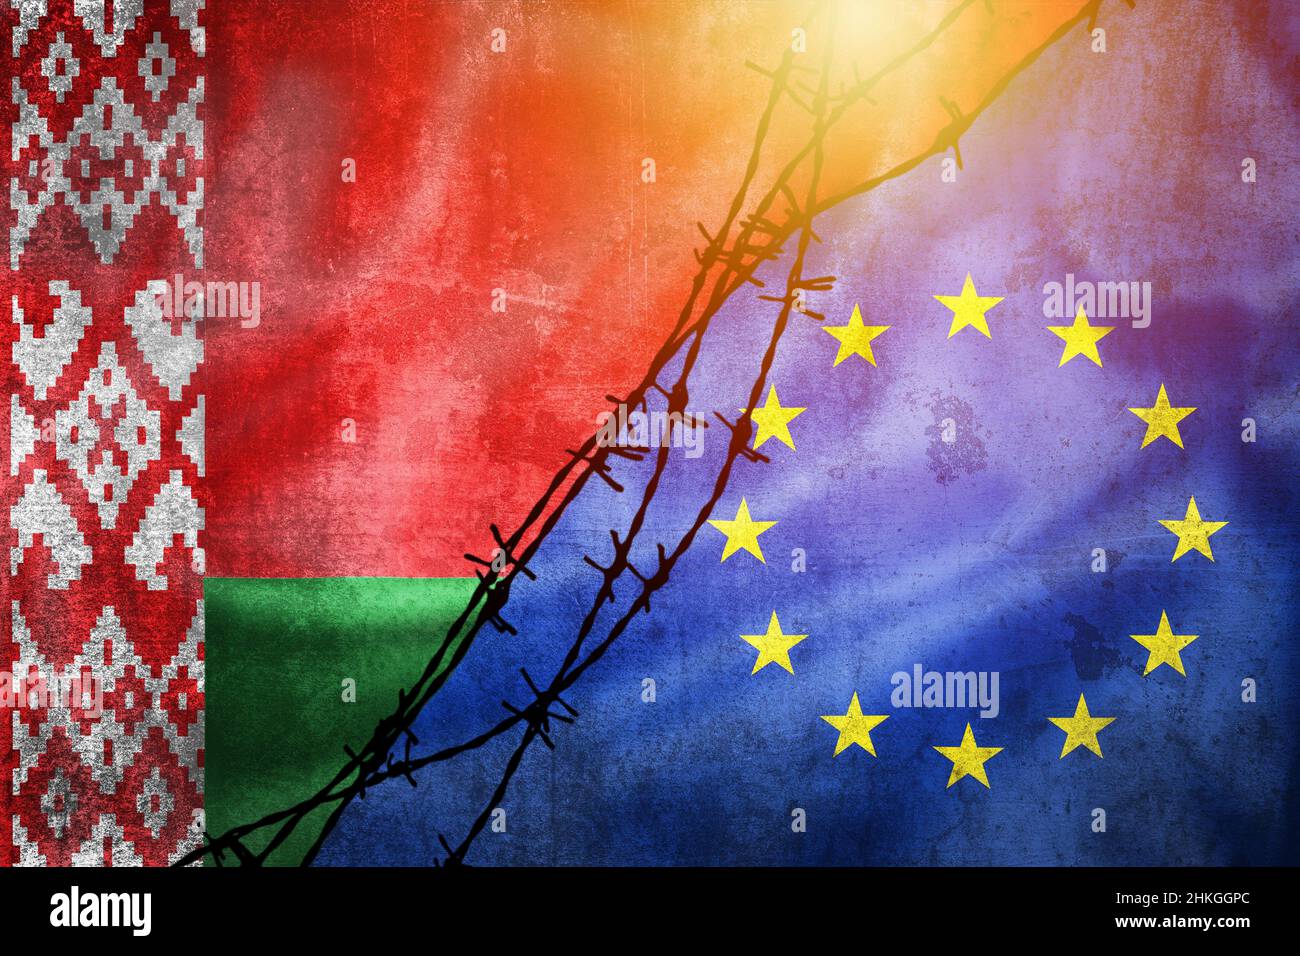 Grunge flags of Belarus and European Union divided by barb wire with sun haze illustration, concept of tense relations in migrant border crisis Stock Photo